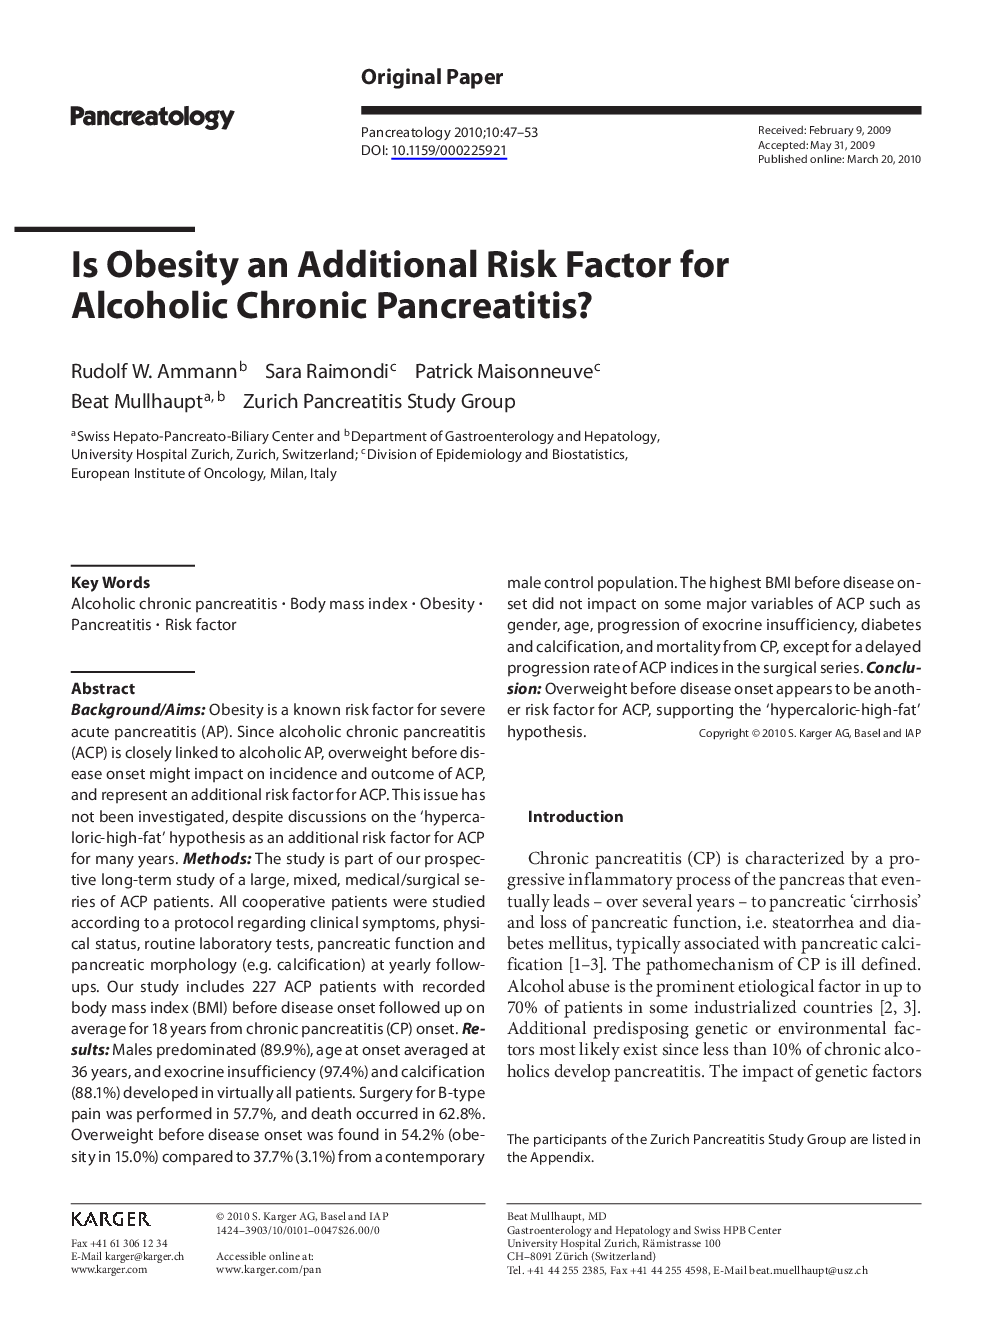 Is Obesity an Additional Risk Factor for Alcoholic Chronic Pancreatitis?